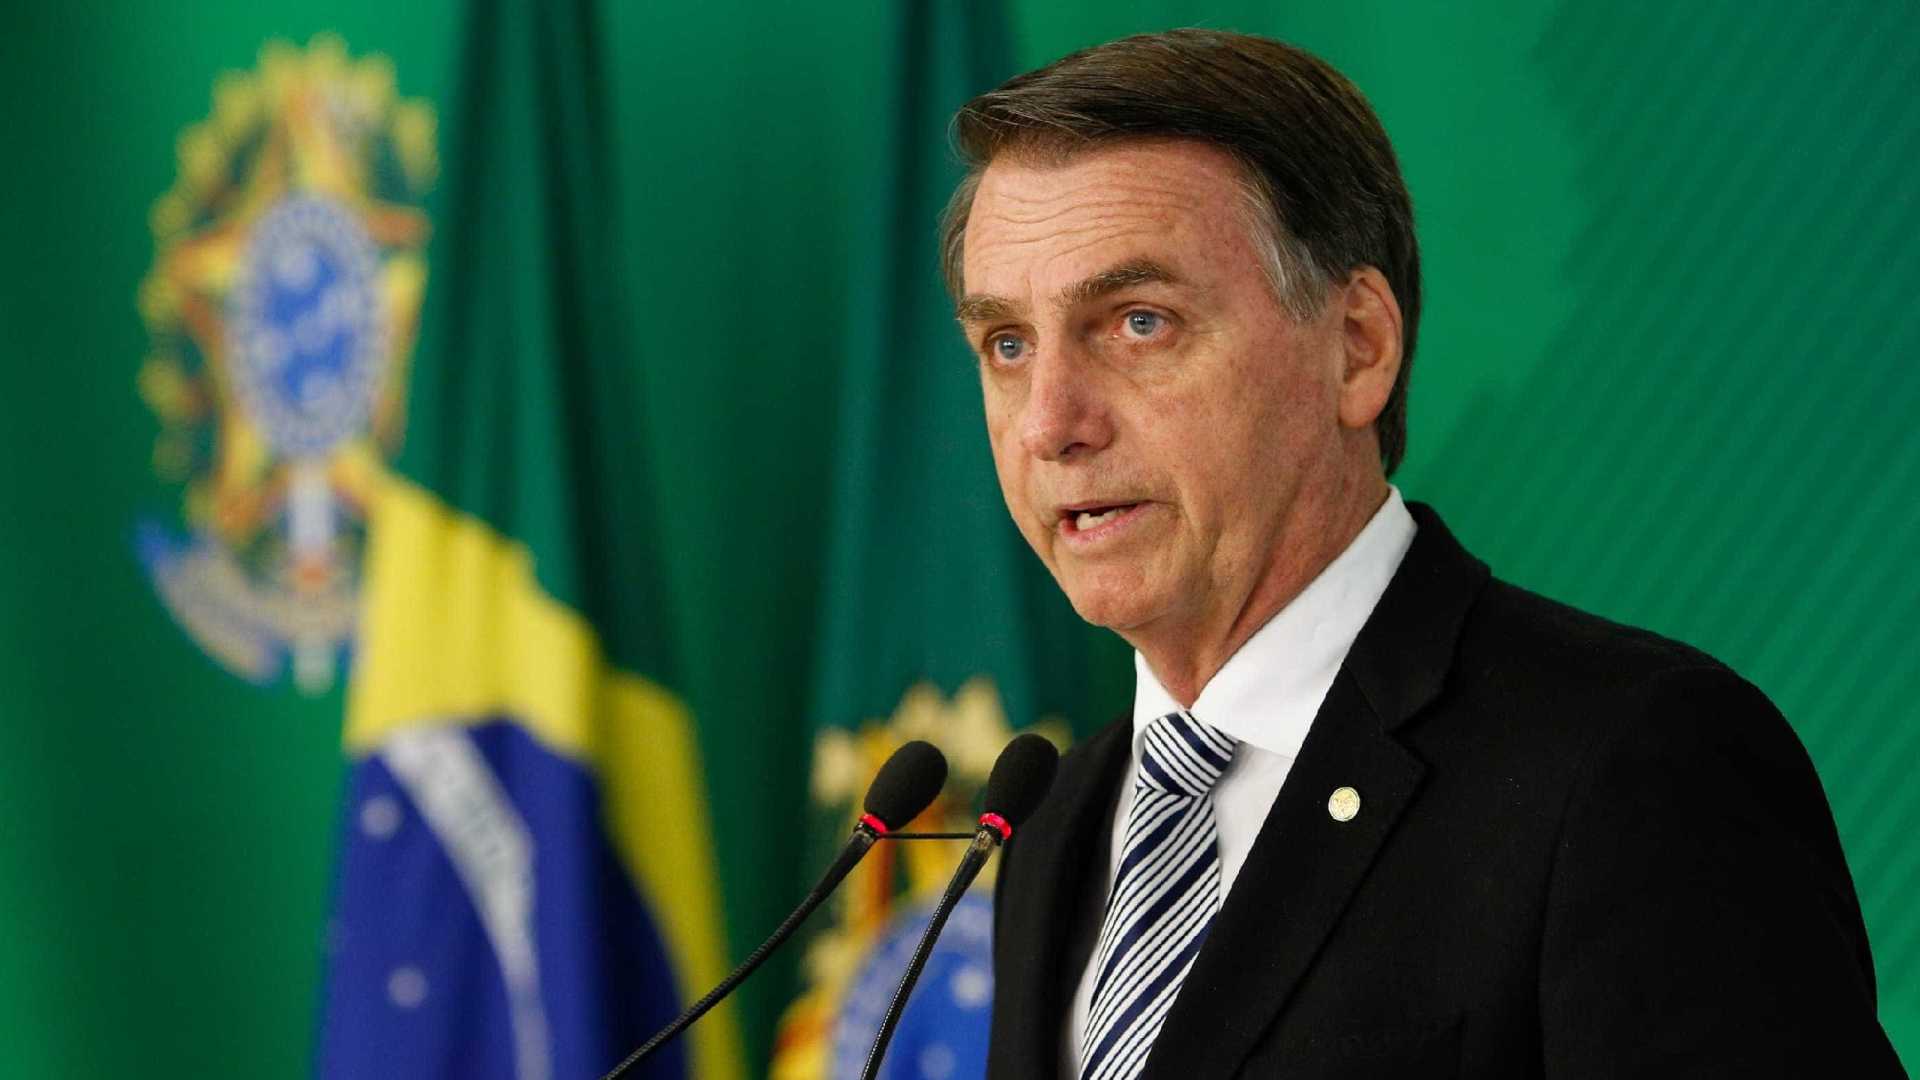 The first steps of the Jair Bolsonaro government